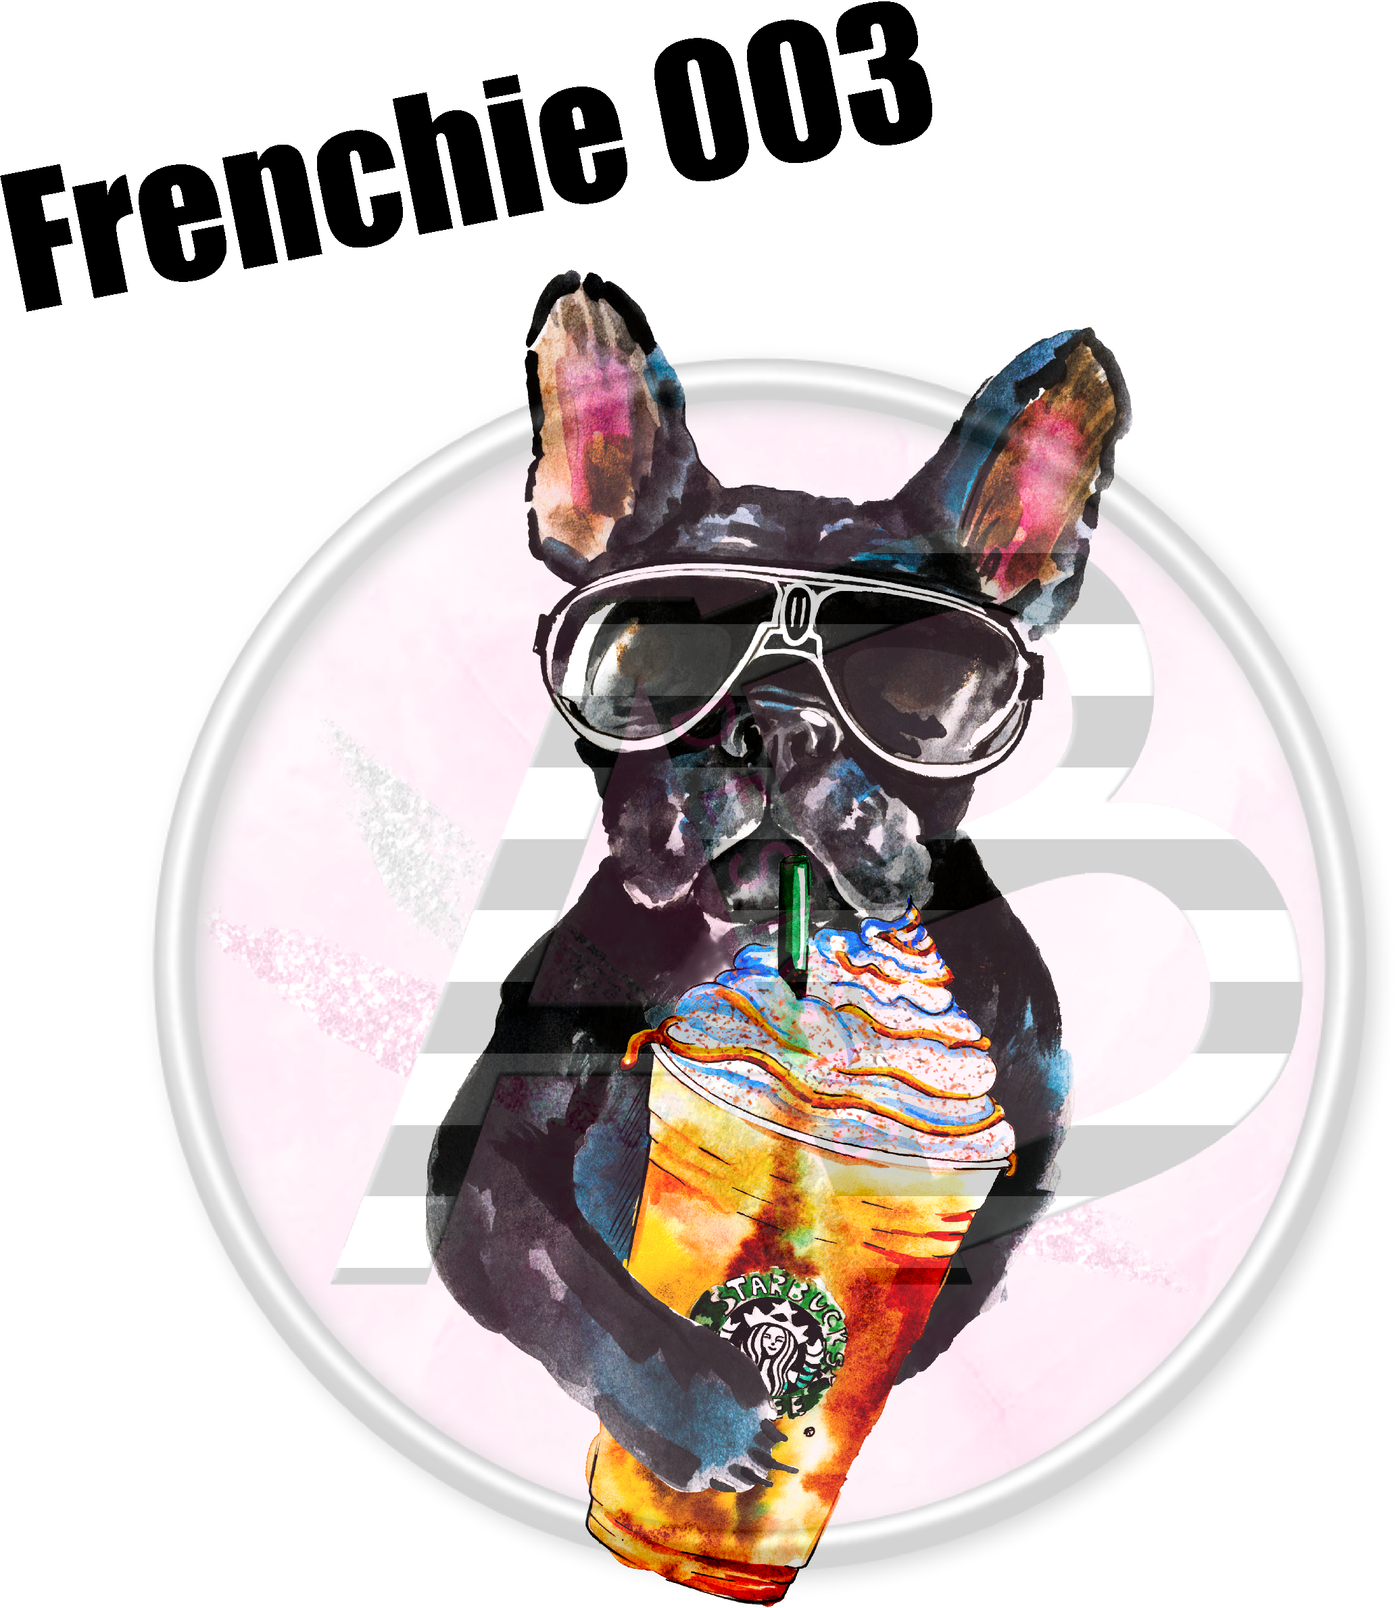 Frenchie 003 - Clear Cast Decal